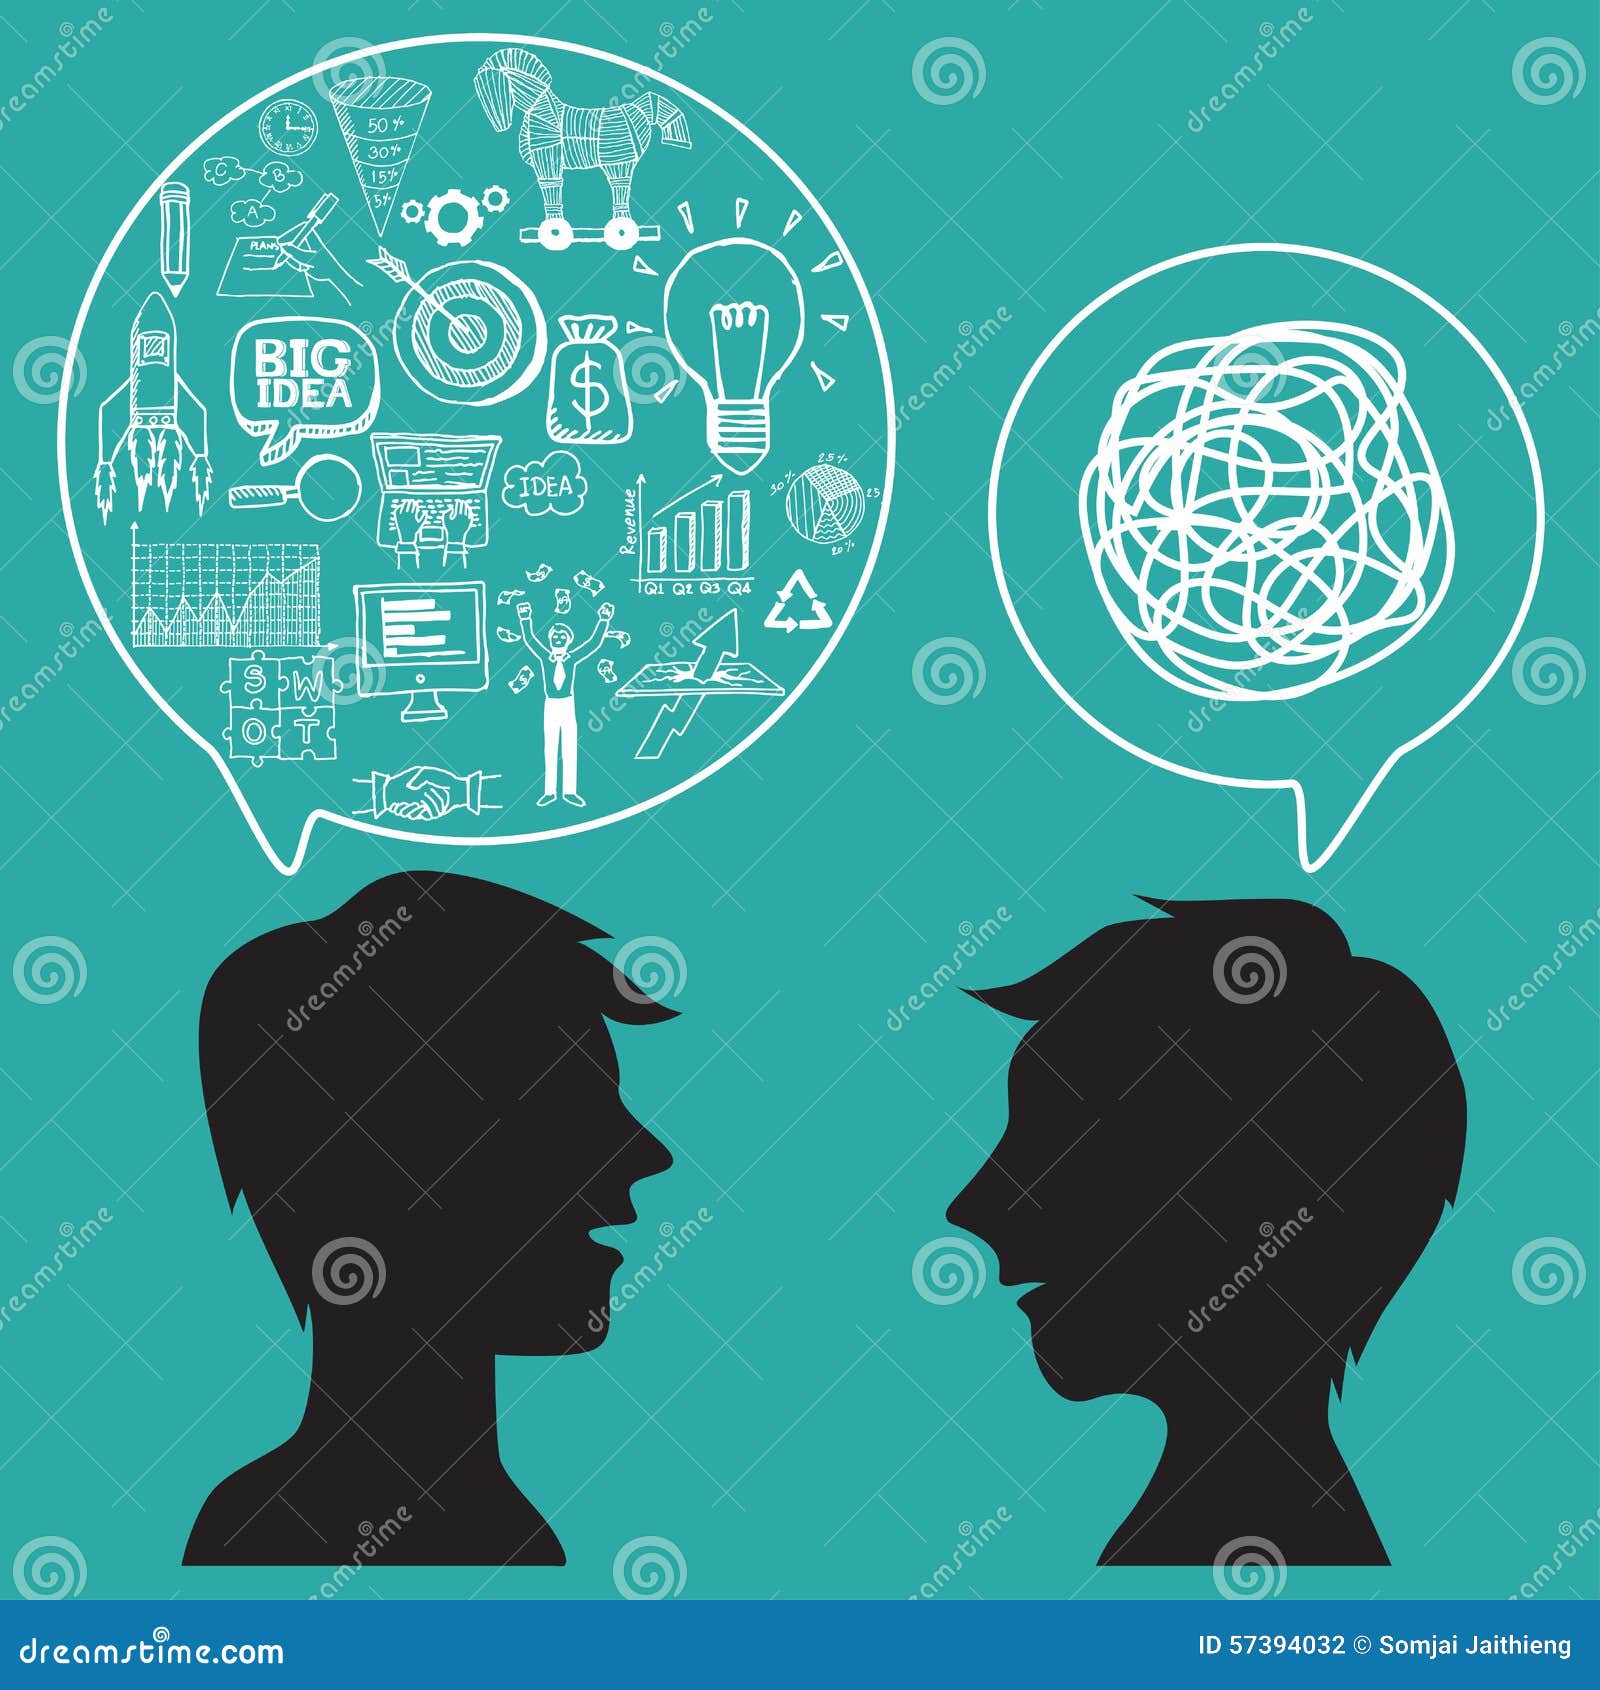 communication concept with business doodles in speech bubble